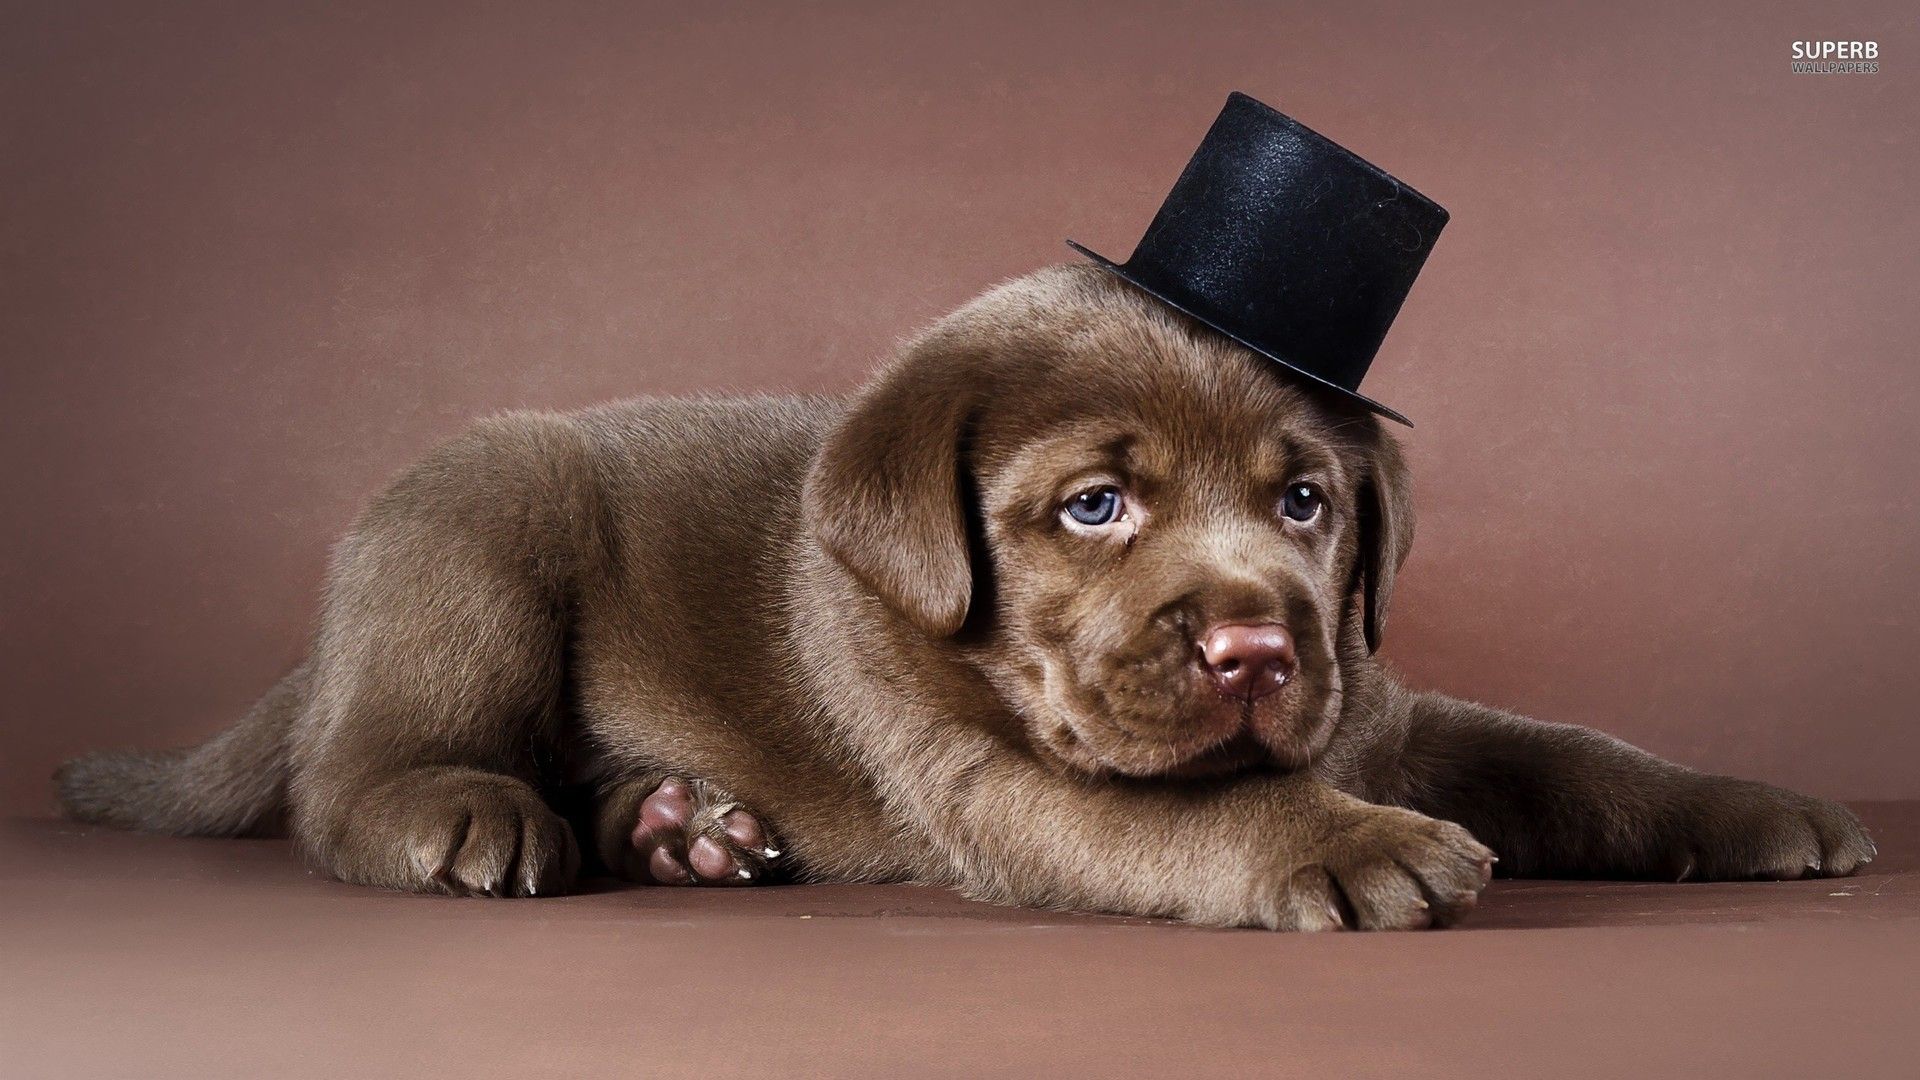 Labrador puppy with a tophat wallpaper - Animal wallpapers